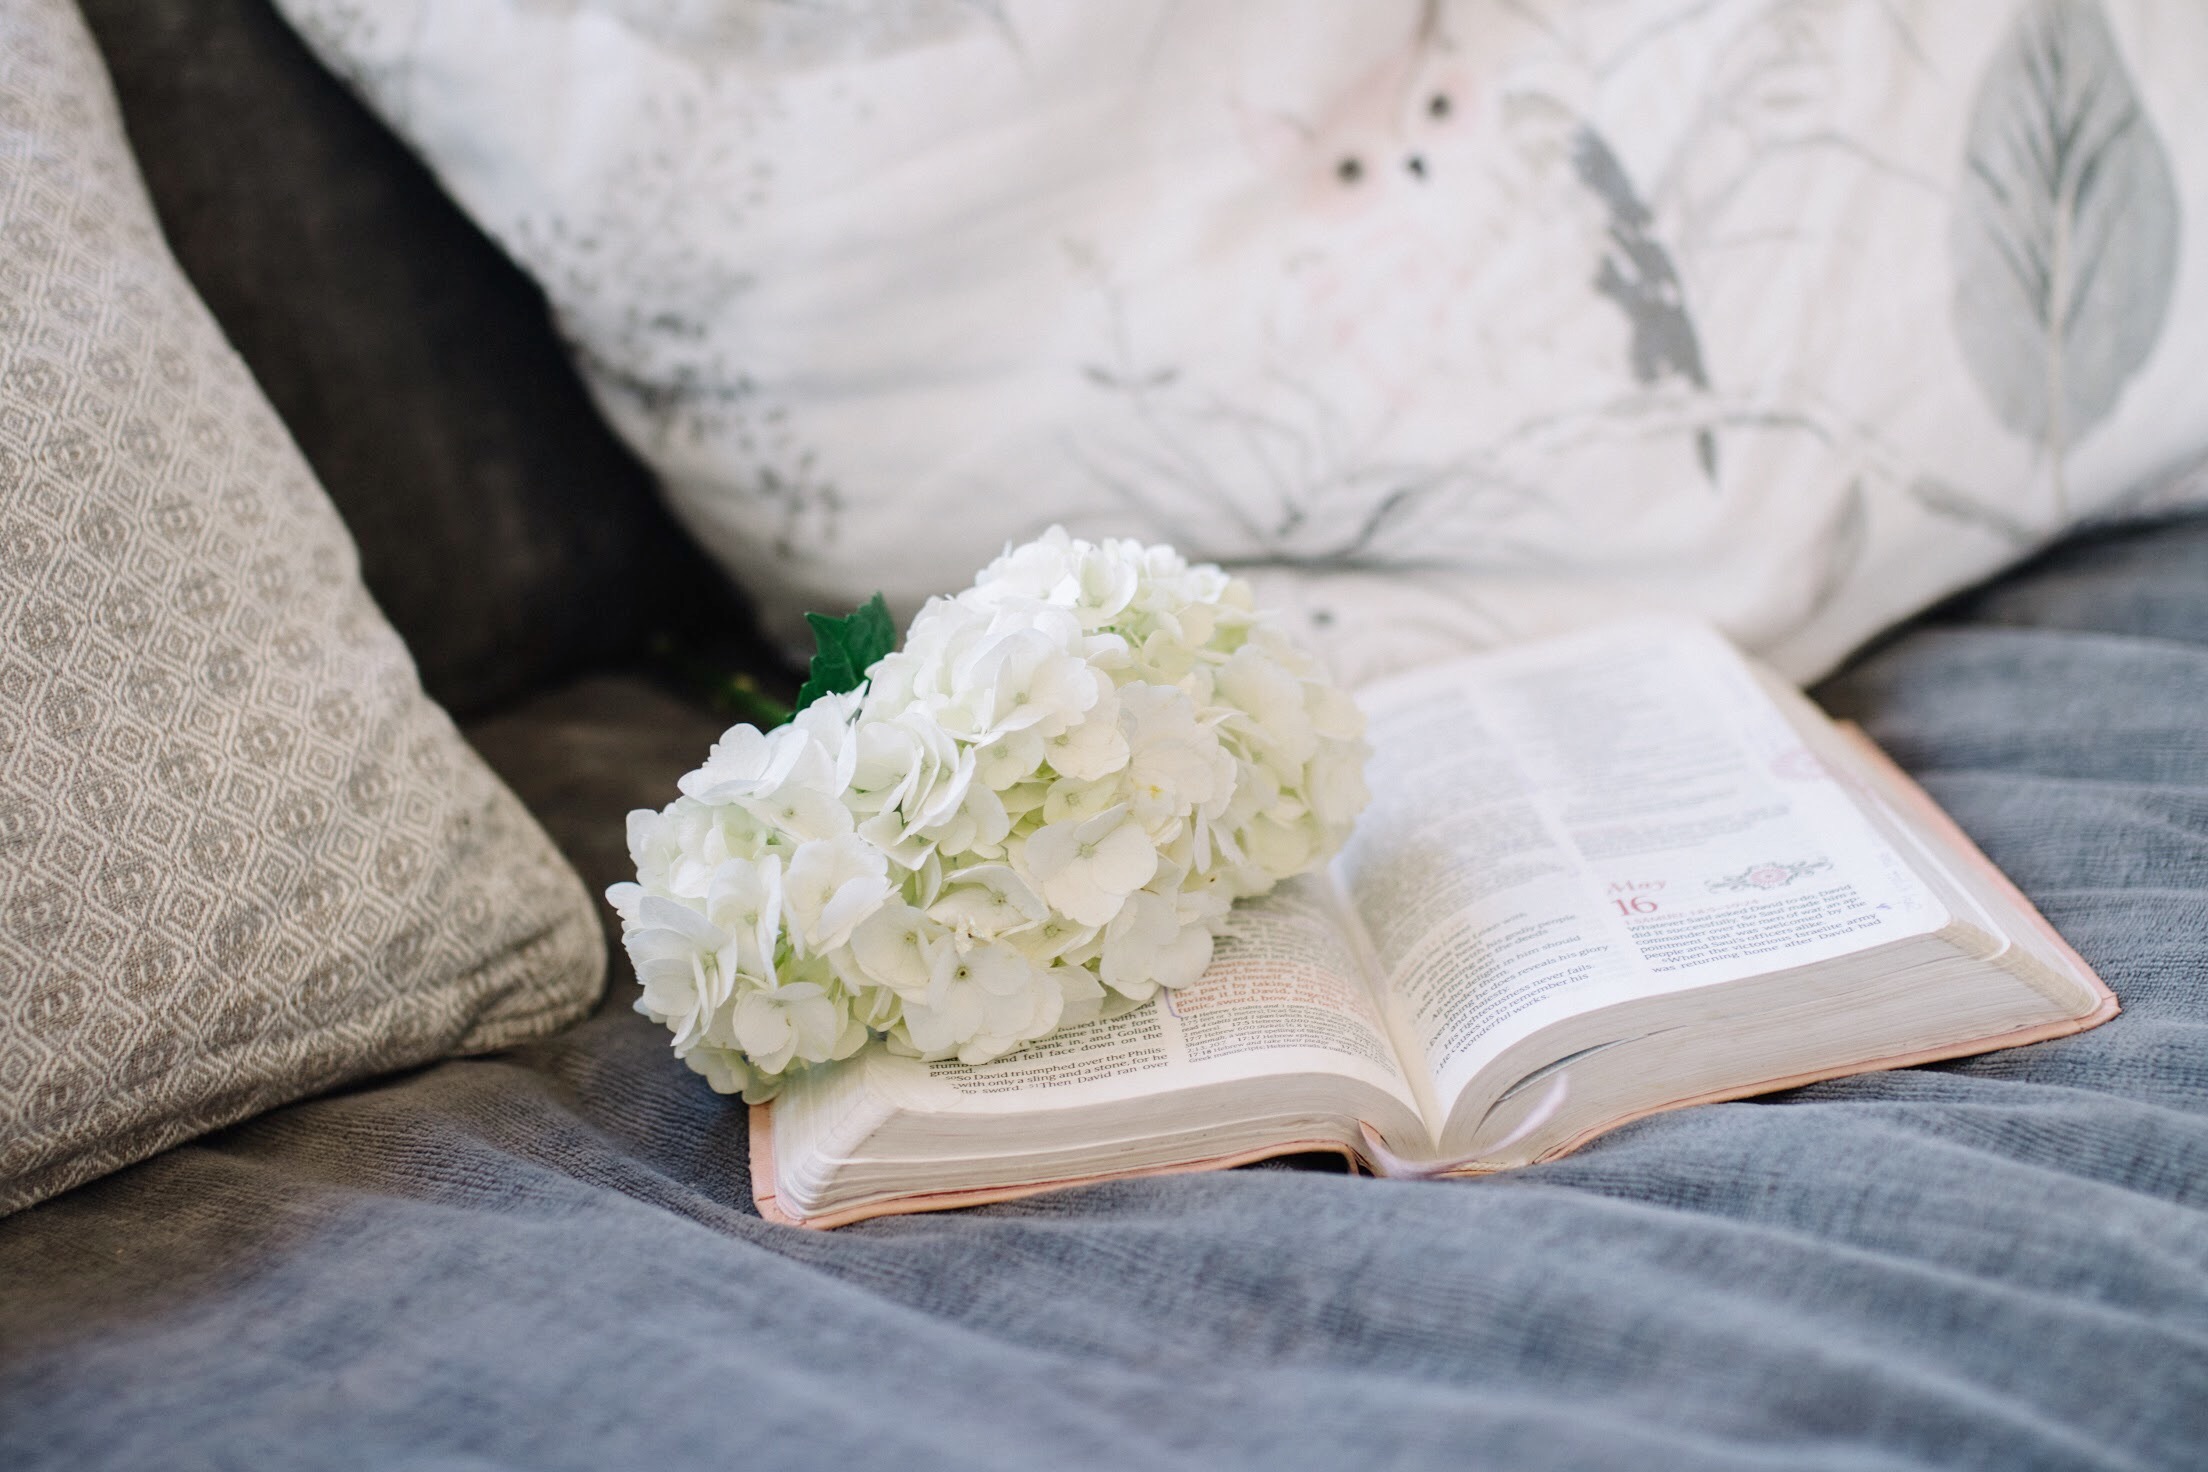 So, You’ve Struggled To Read Through the Bible? You’re Not Alone.